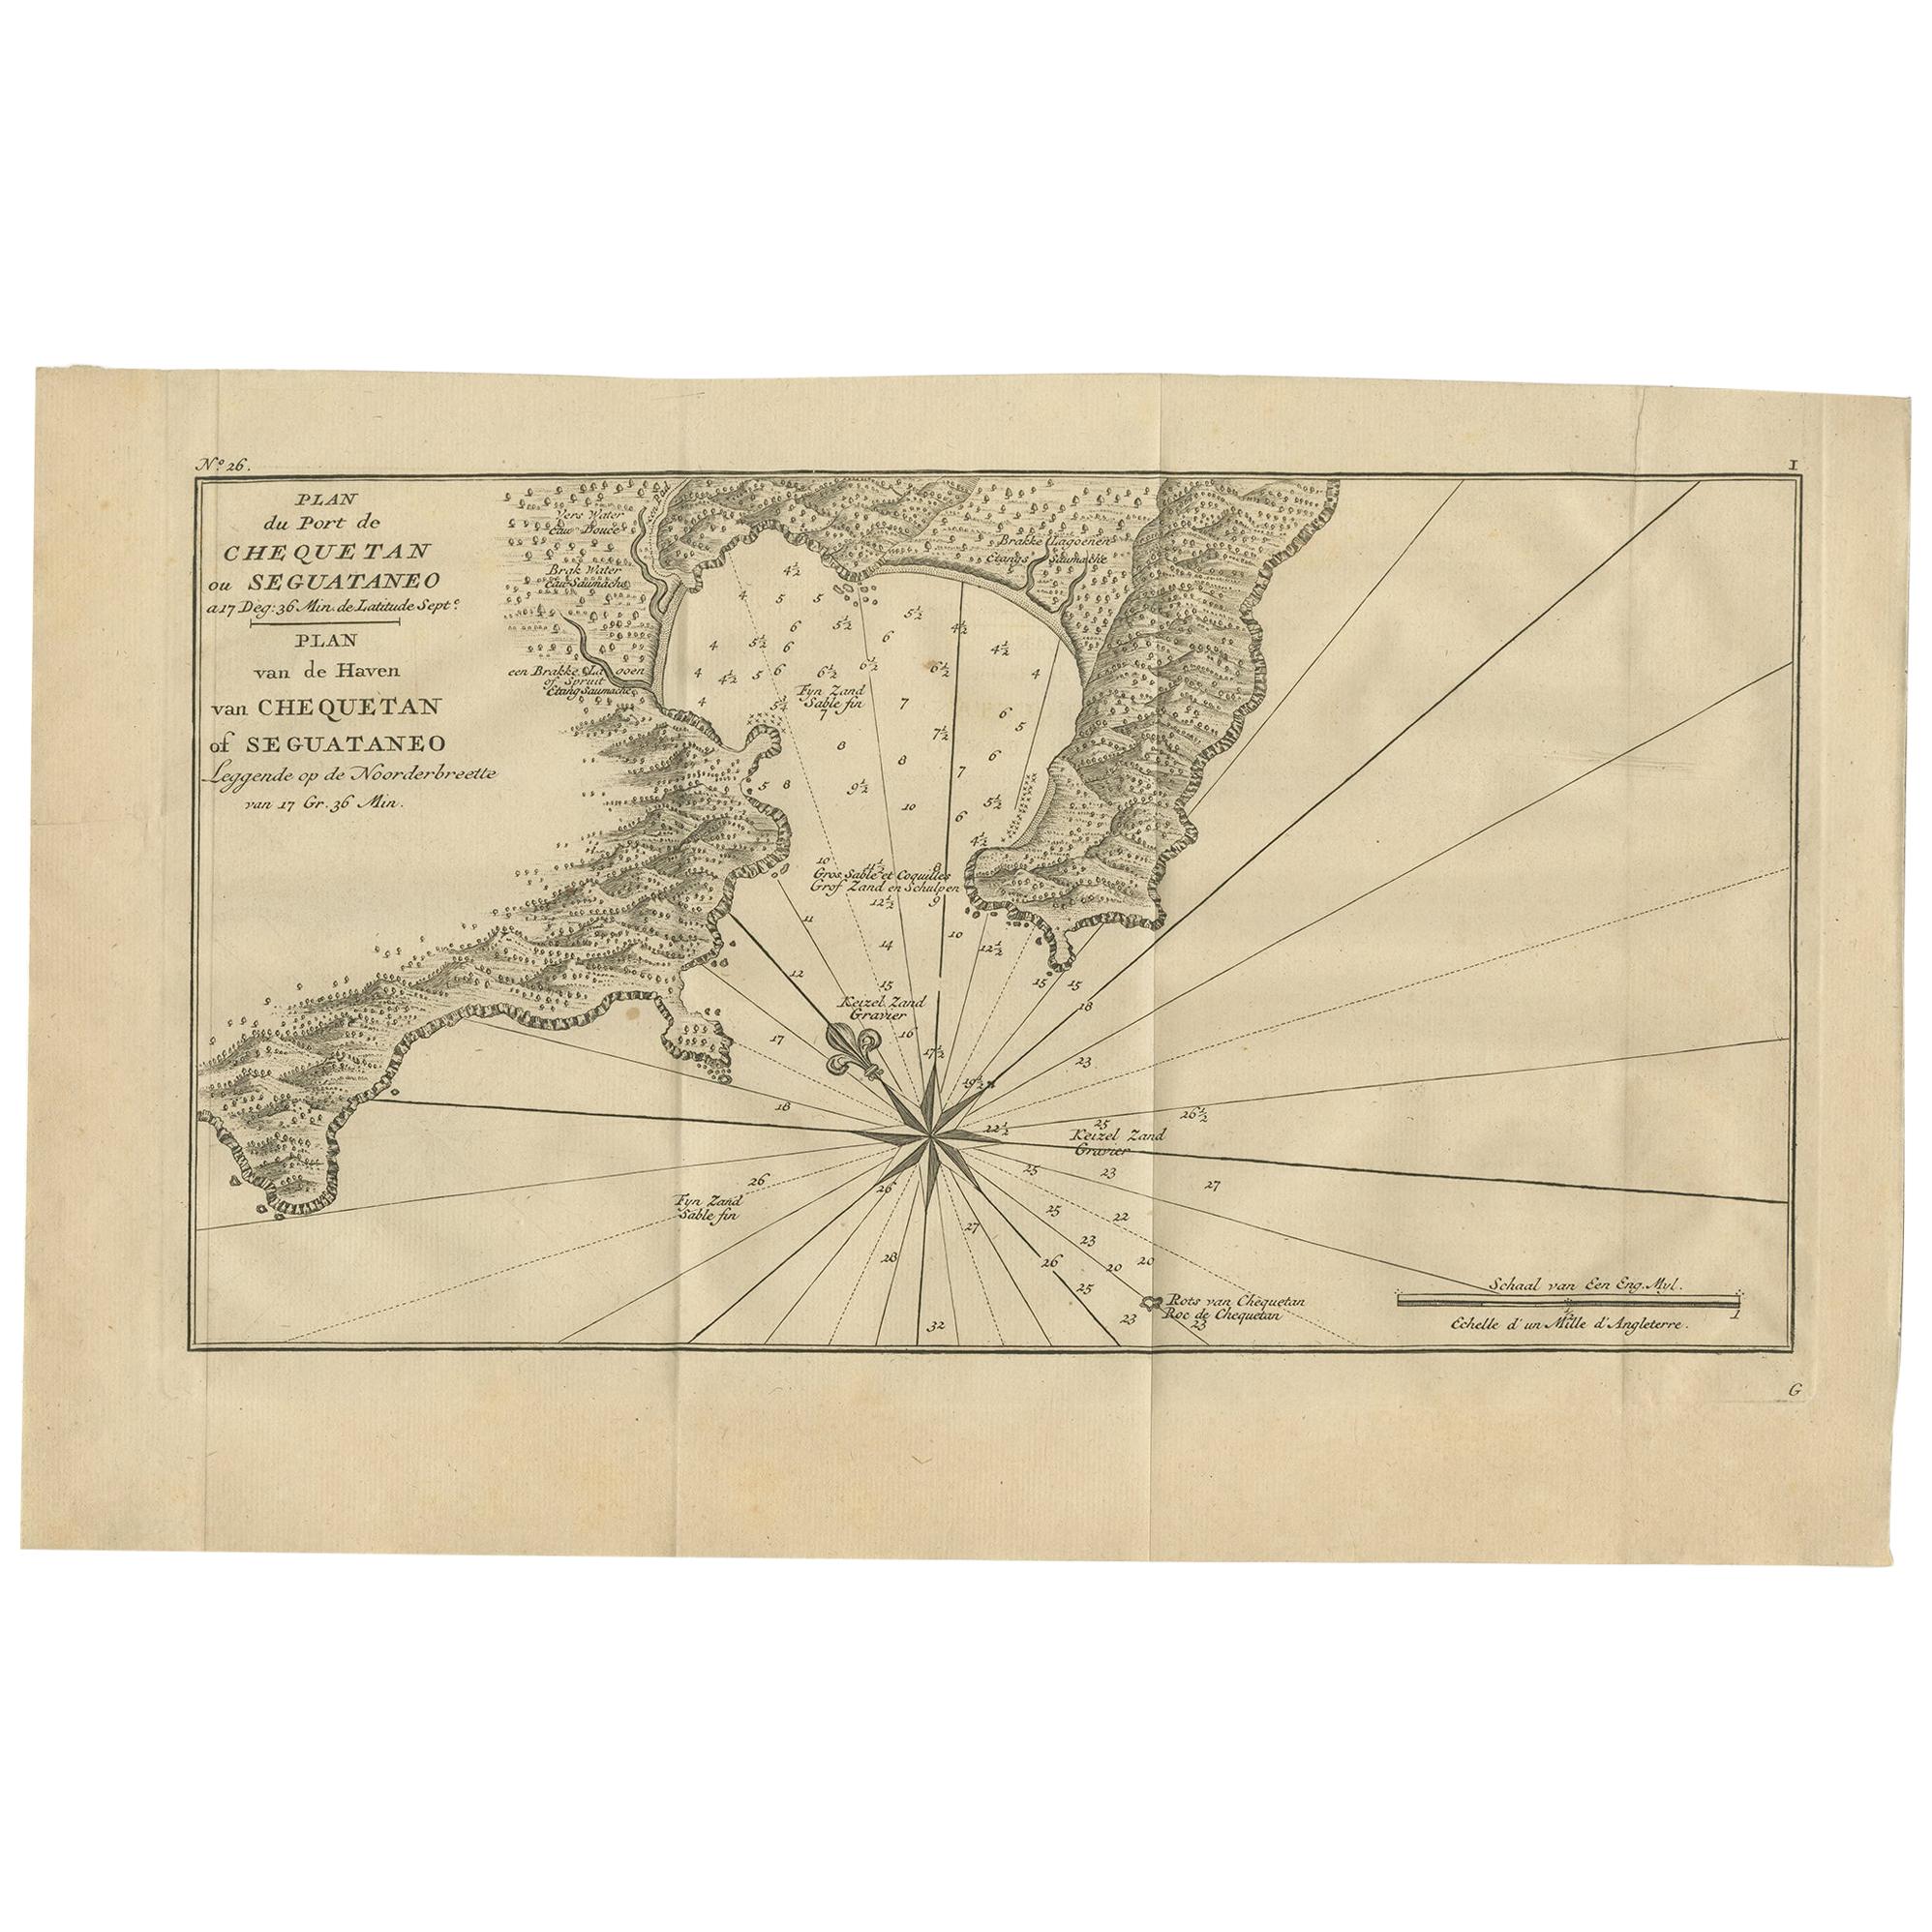 Antique Map of the Port of Zihuatanejo by Anson '1749' For Sale